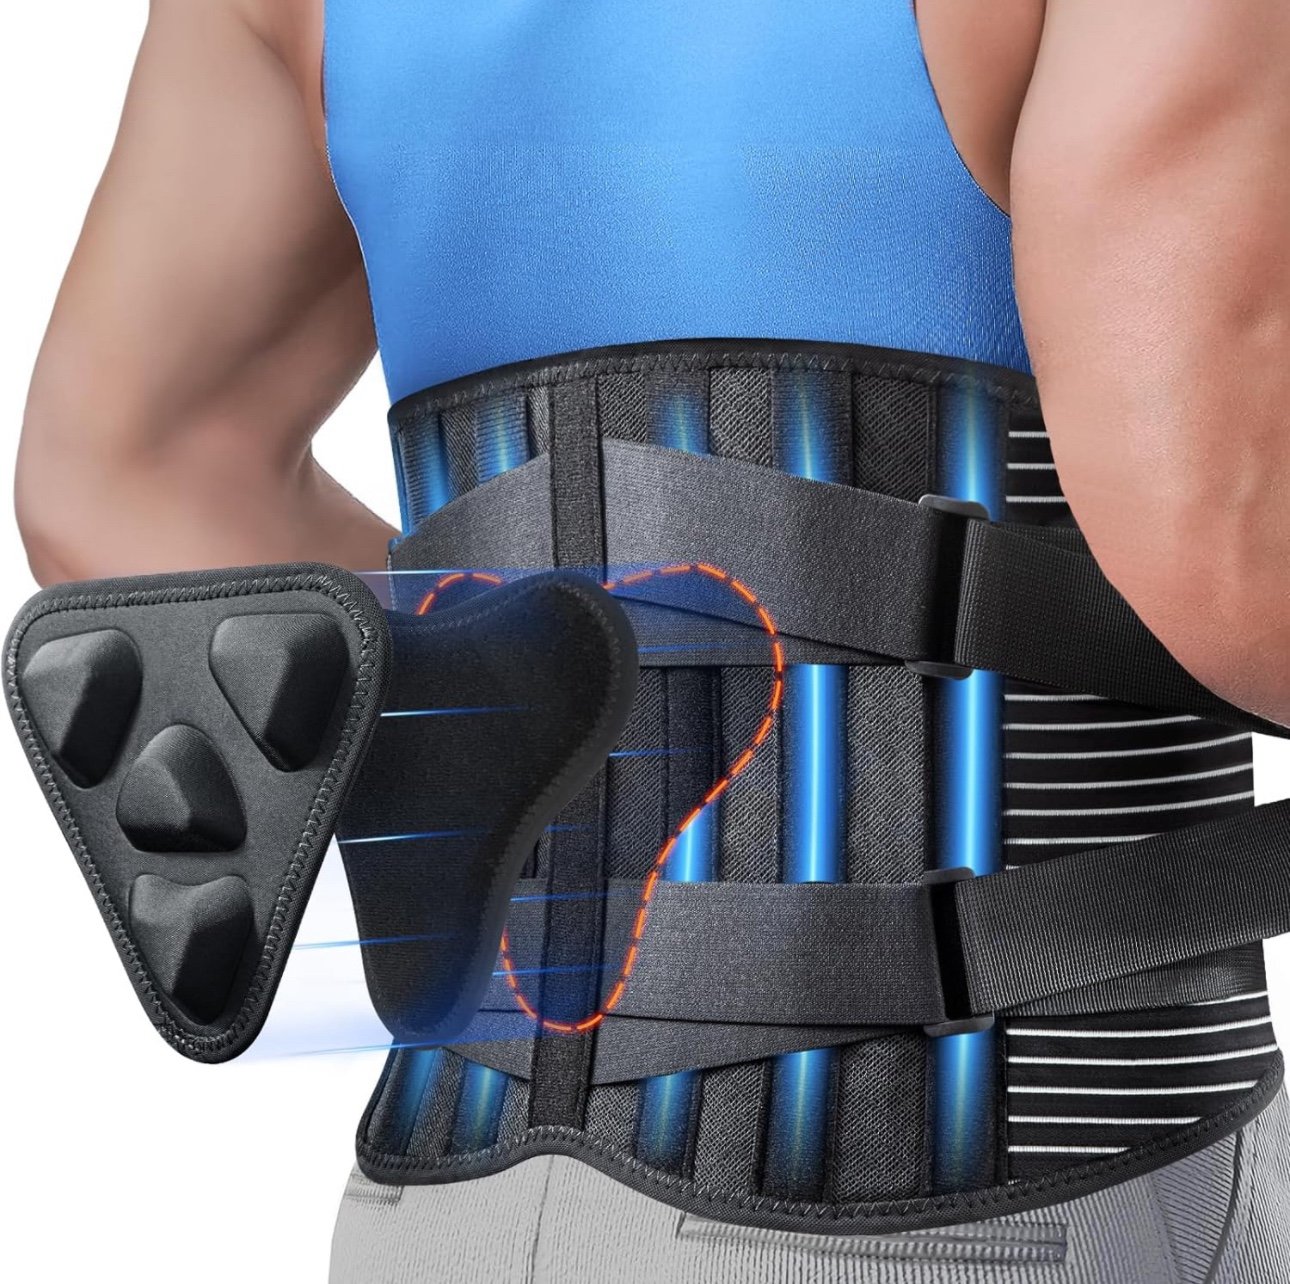 Back Brace for Lower Back Pain Relief with 3D Lumbar Pad 7IsLz3ygh